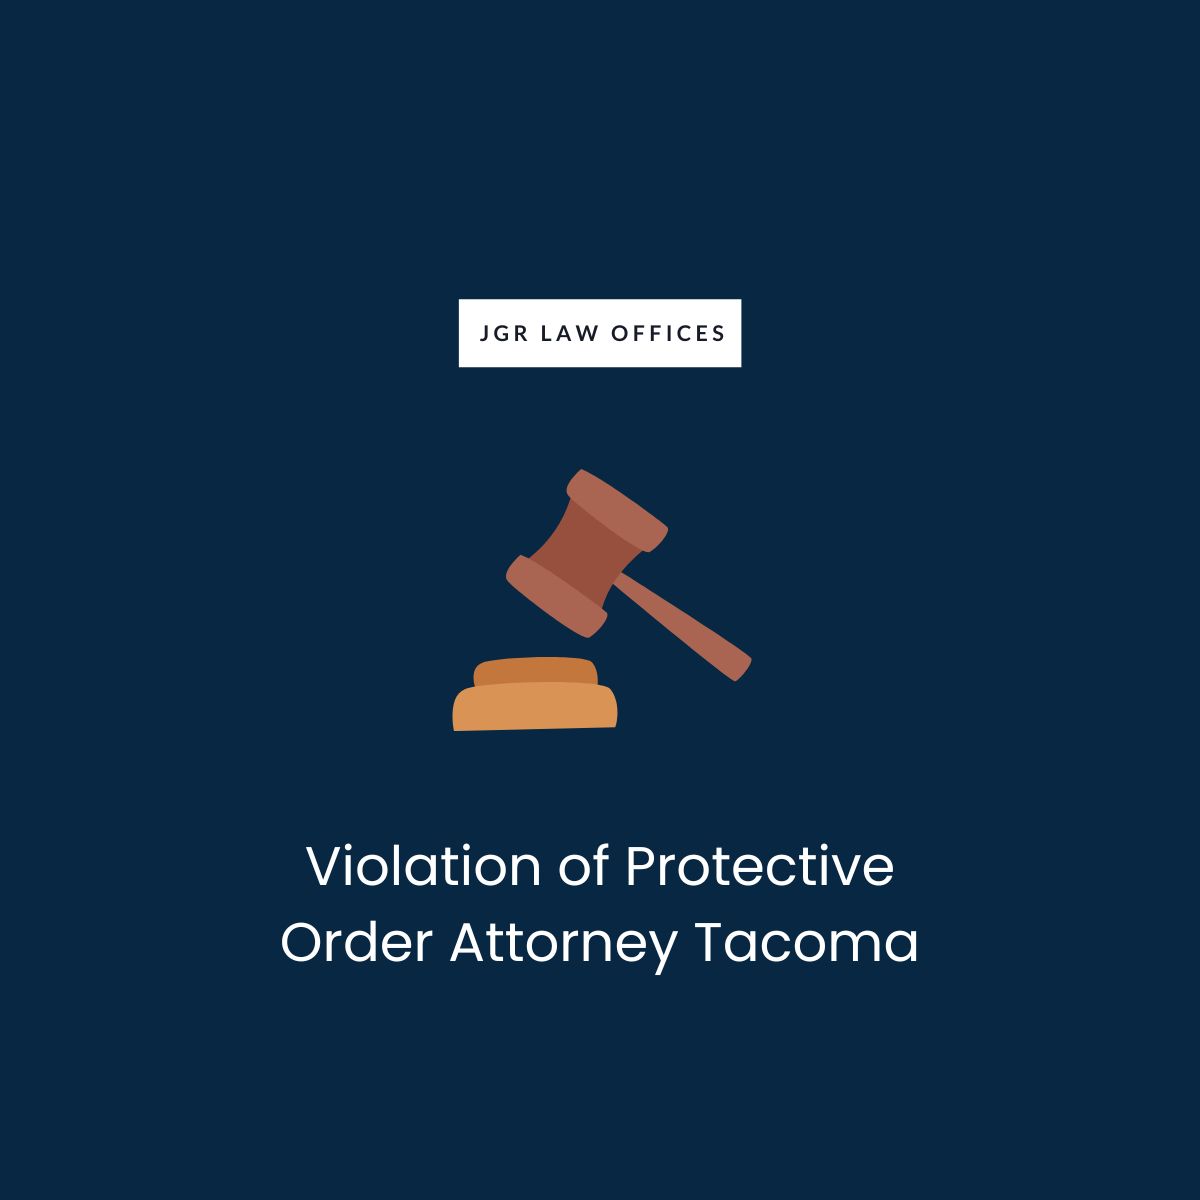 Violation of Protective Order Attorney Tacoma